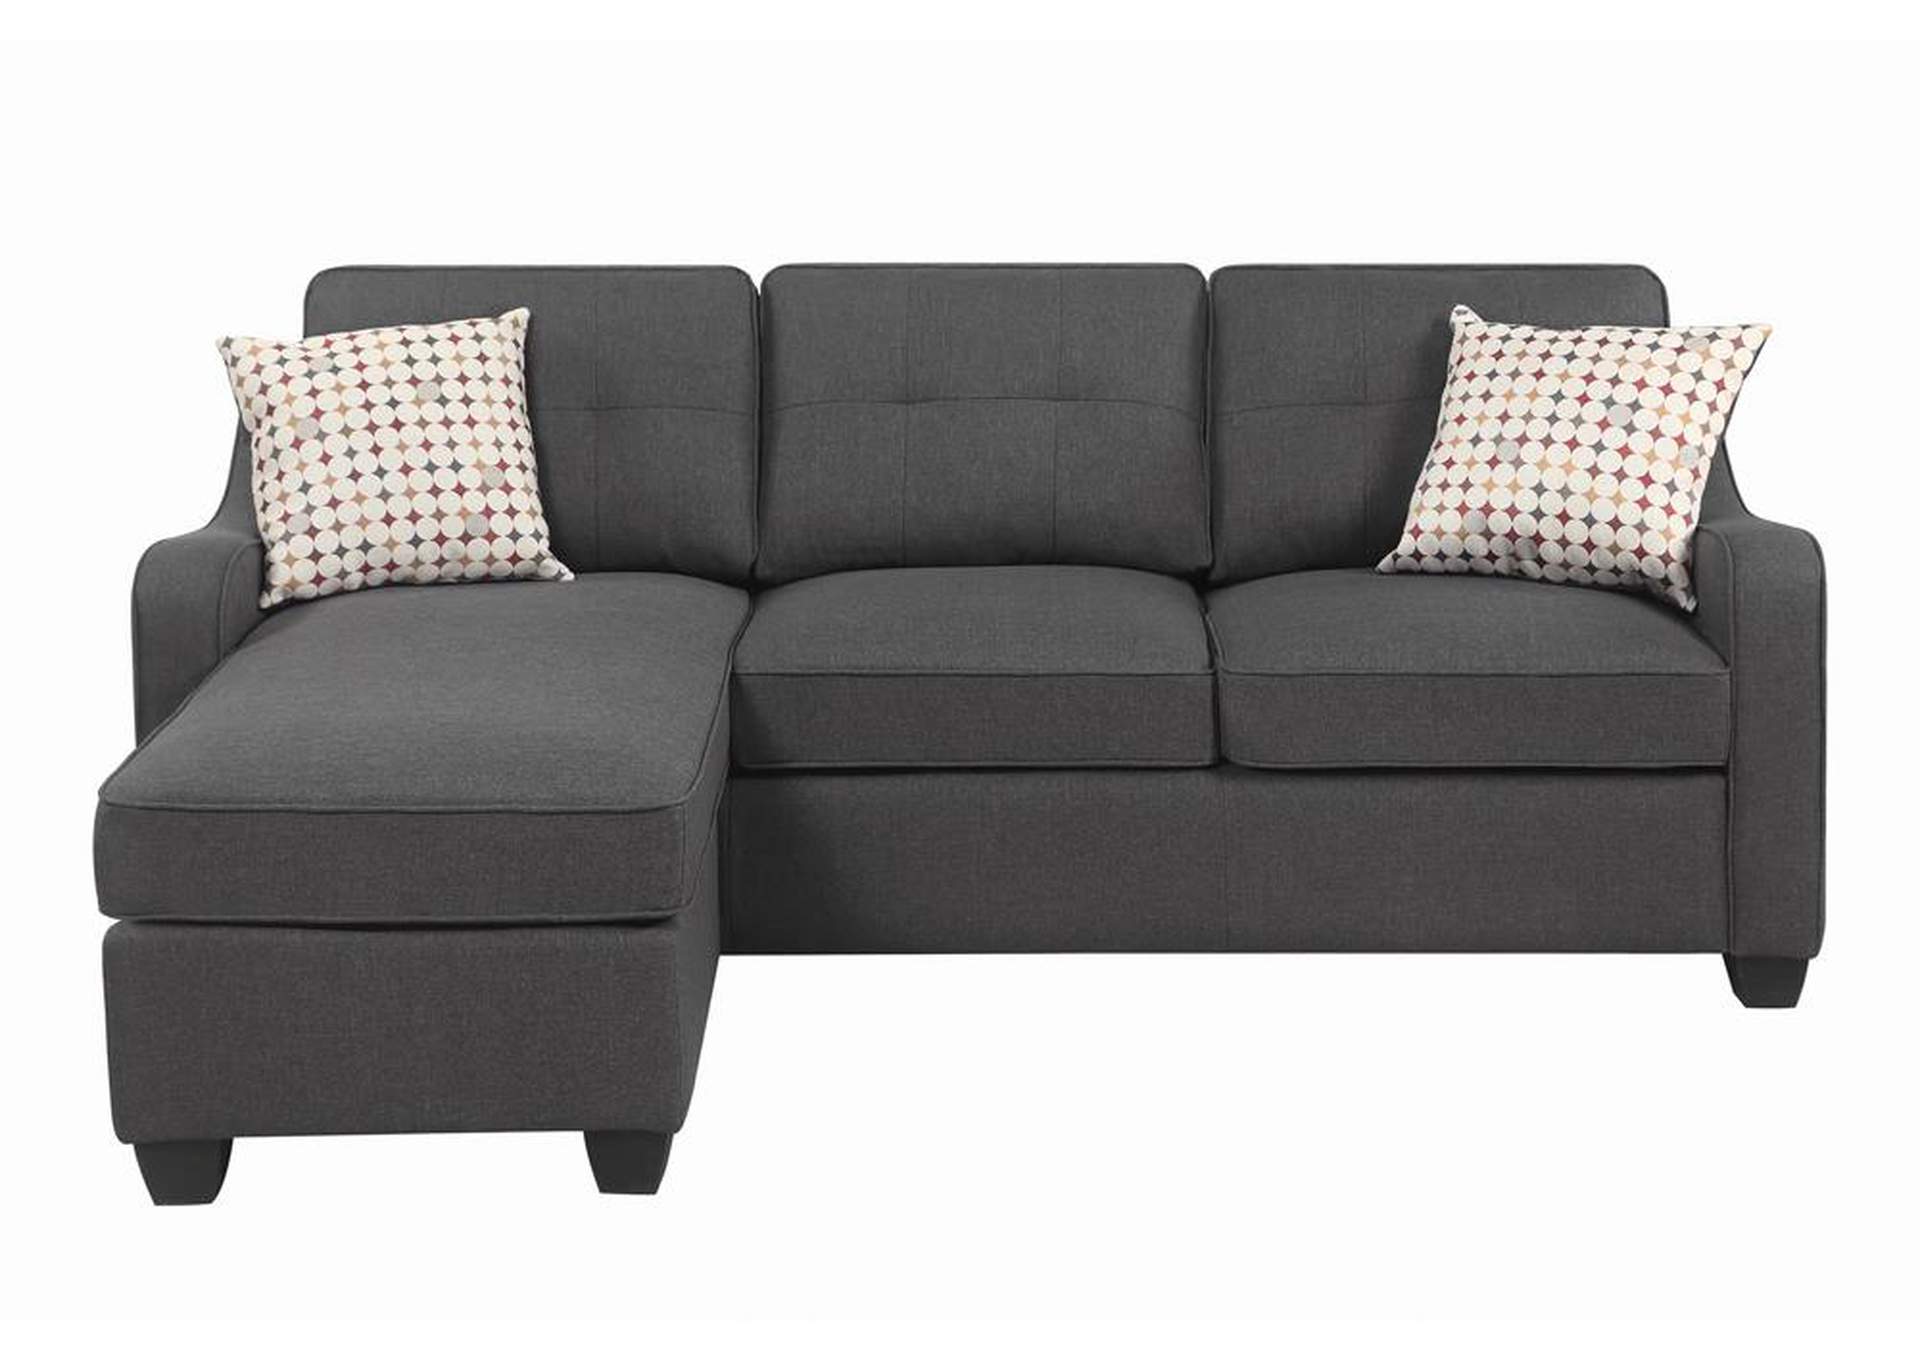 REVERSIBLE SECTIONAL,Coaster Furniture